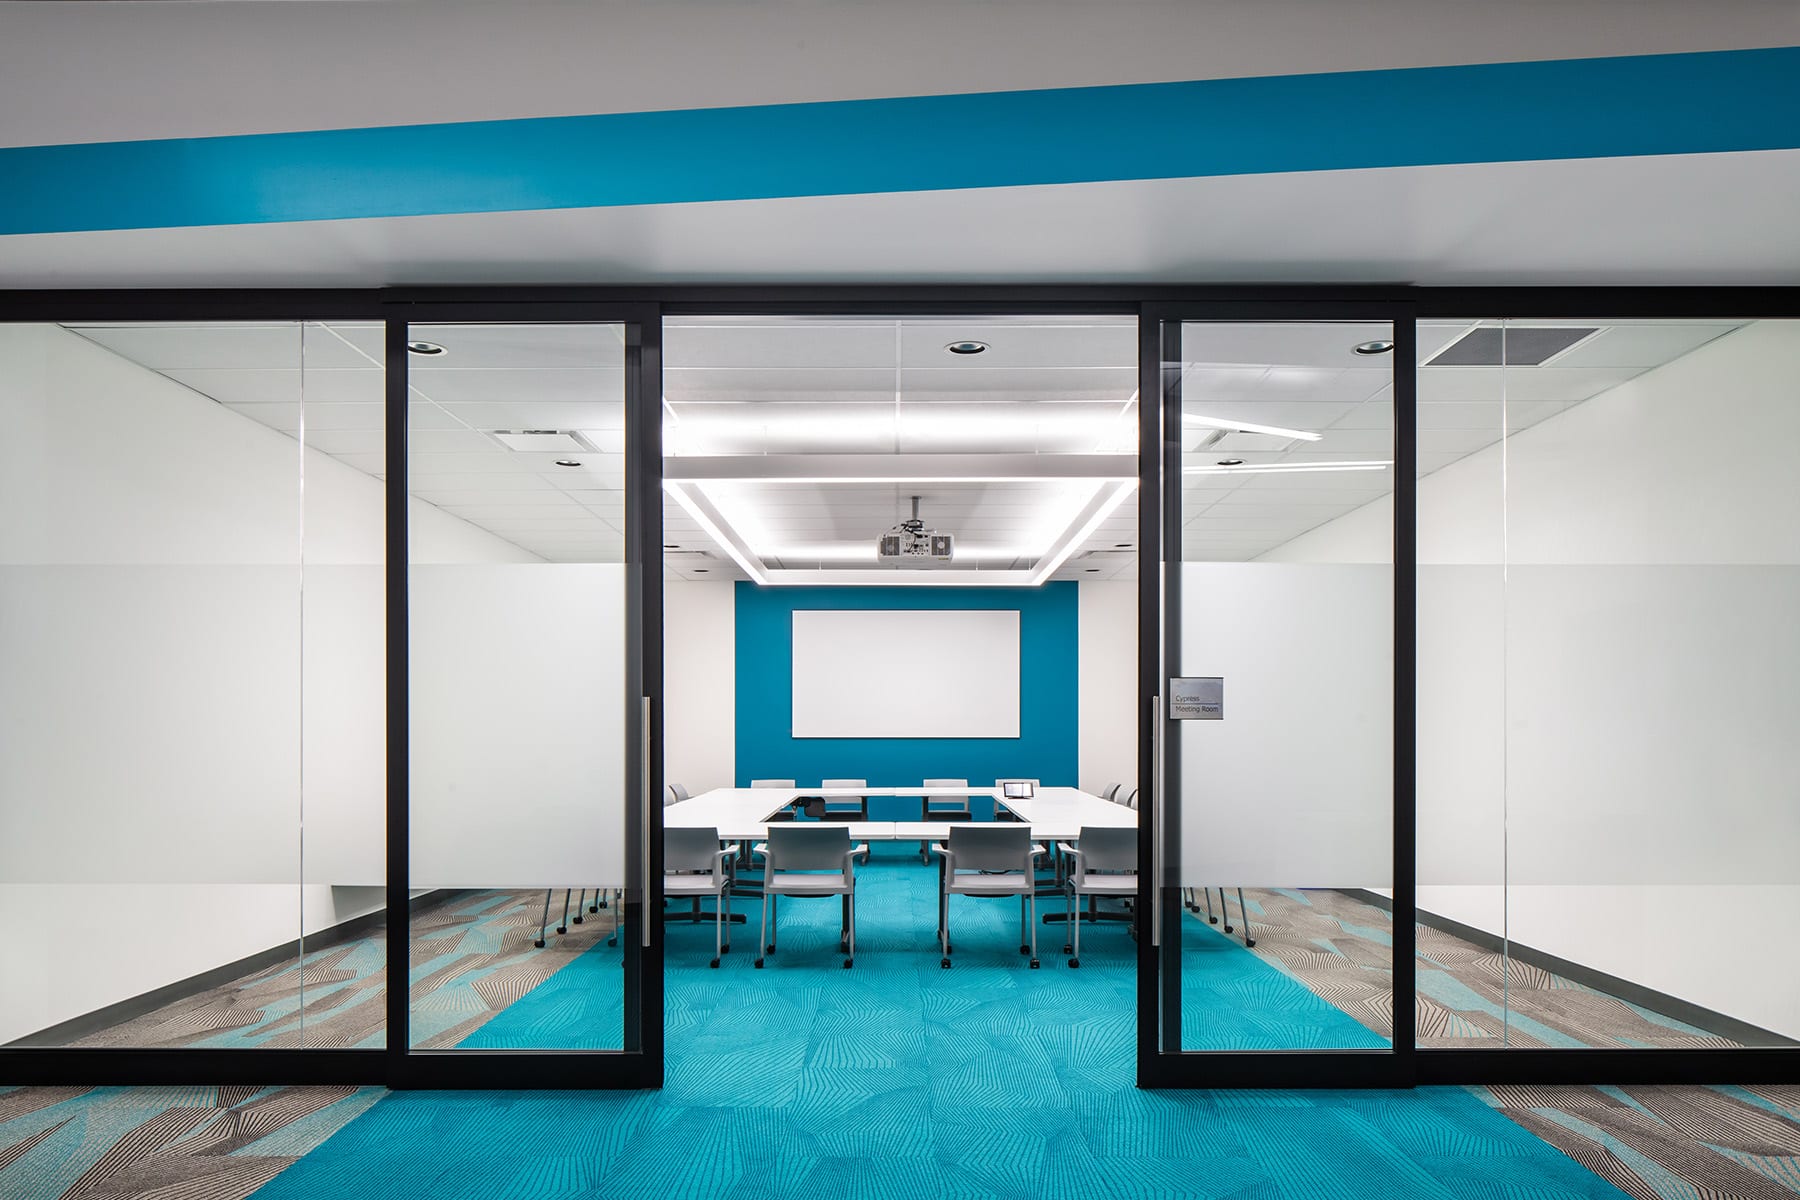 Surrey office design for large meeting room with AV, demountable walls